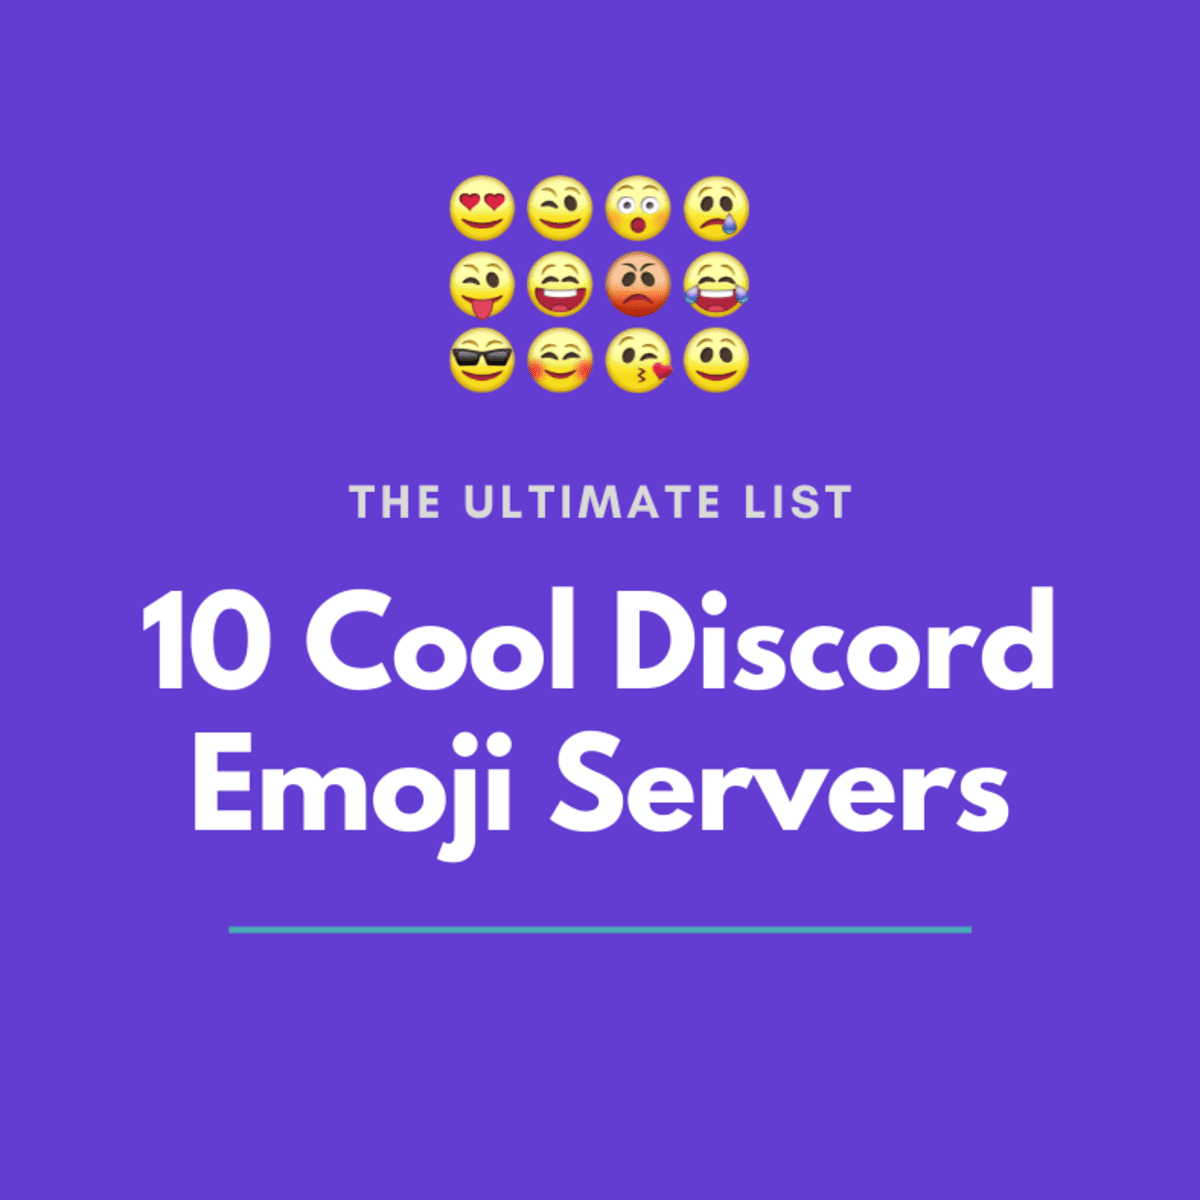 10 Cool Discord Emoji Servers to Check Out: The Ultimate List - TurboFuture